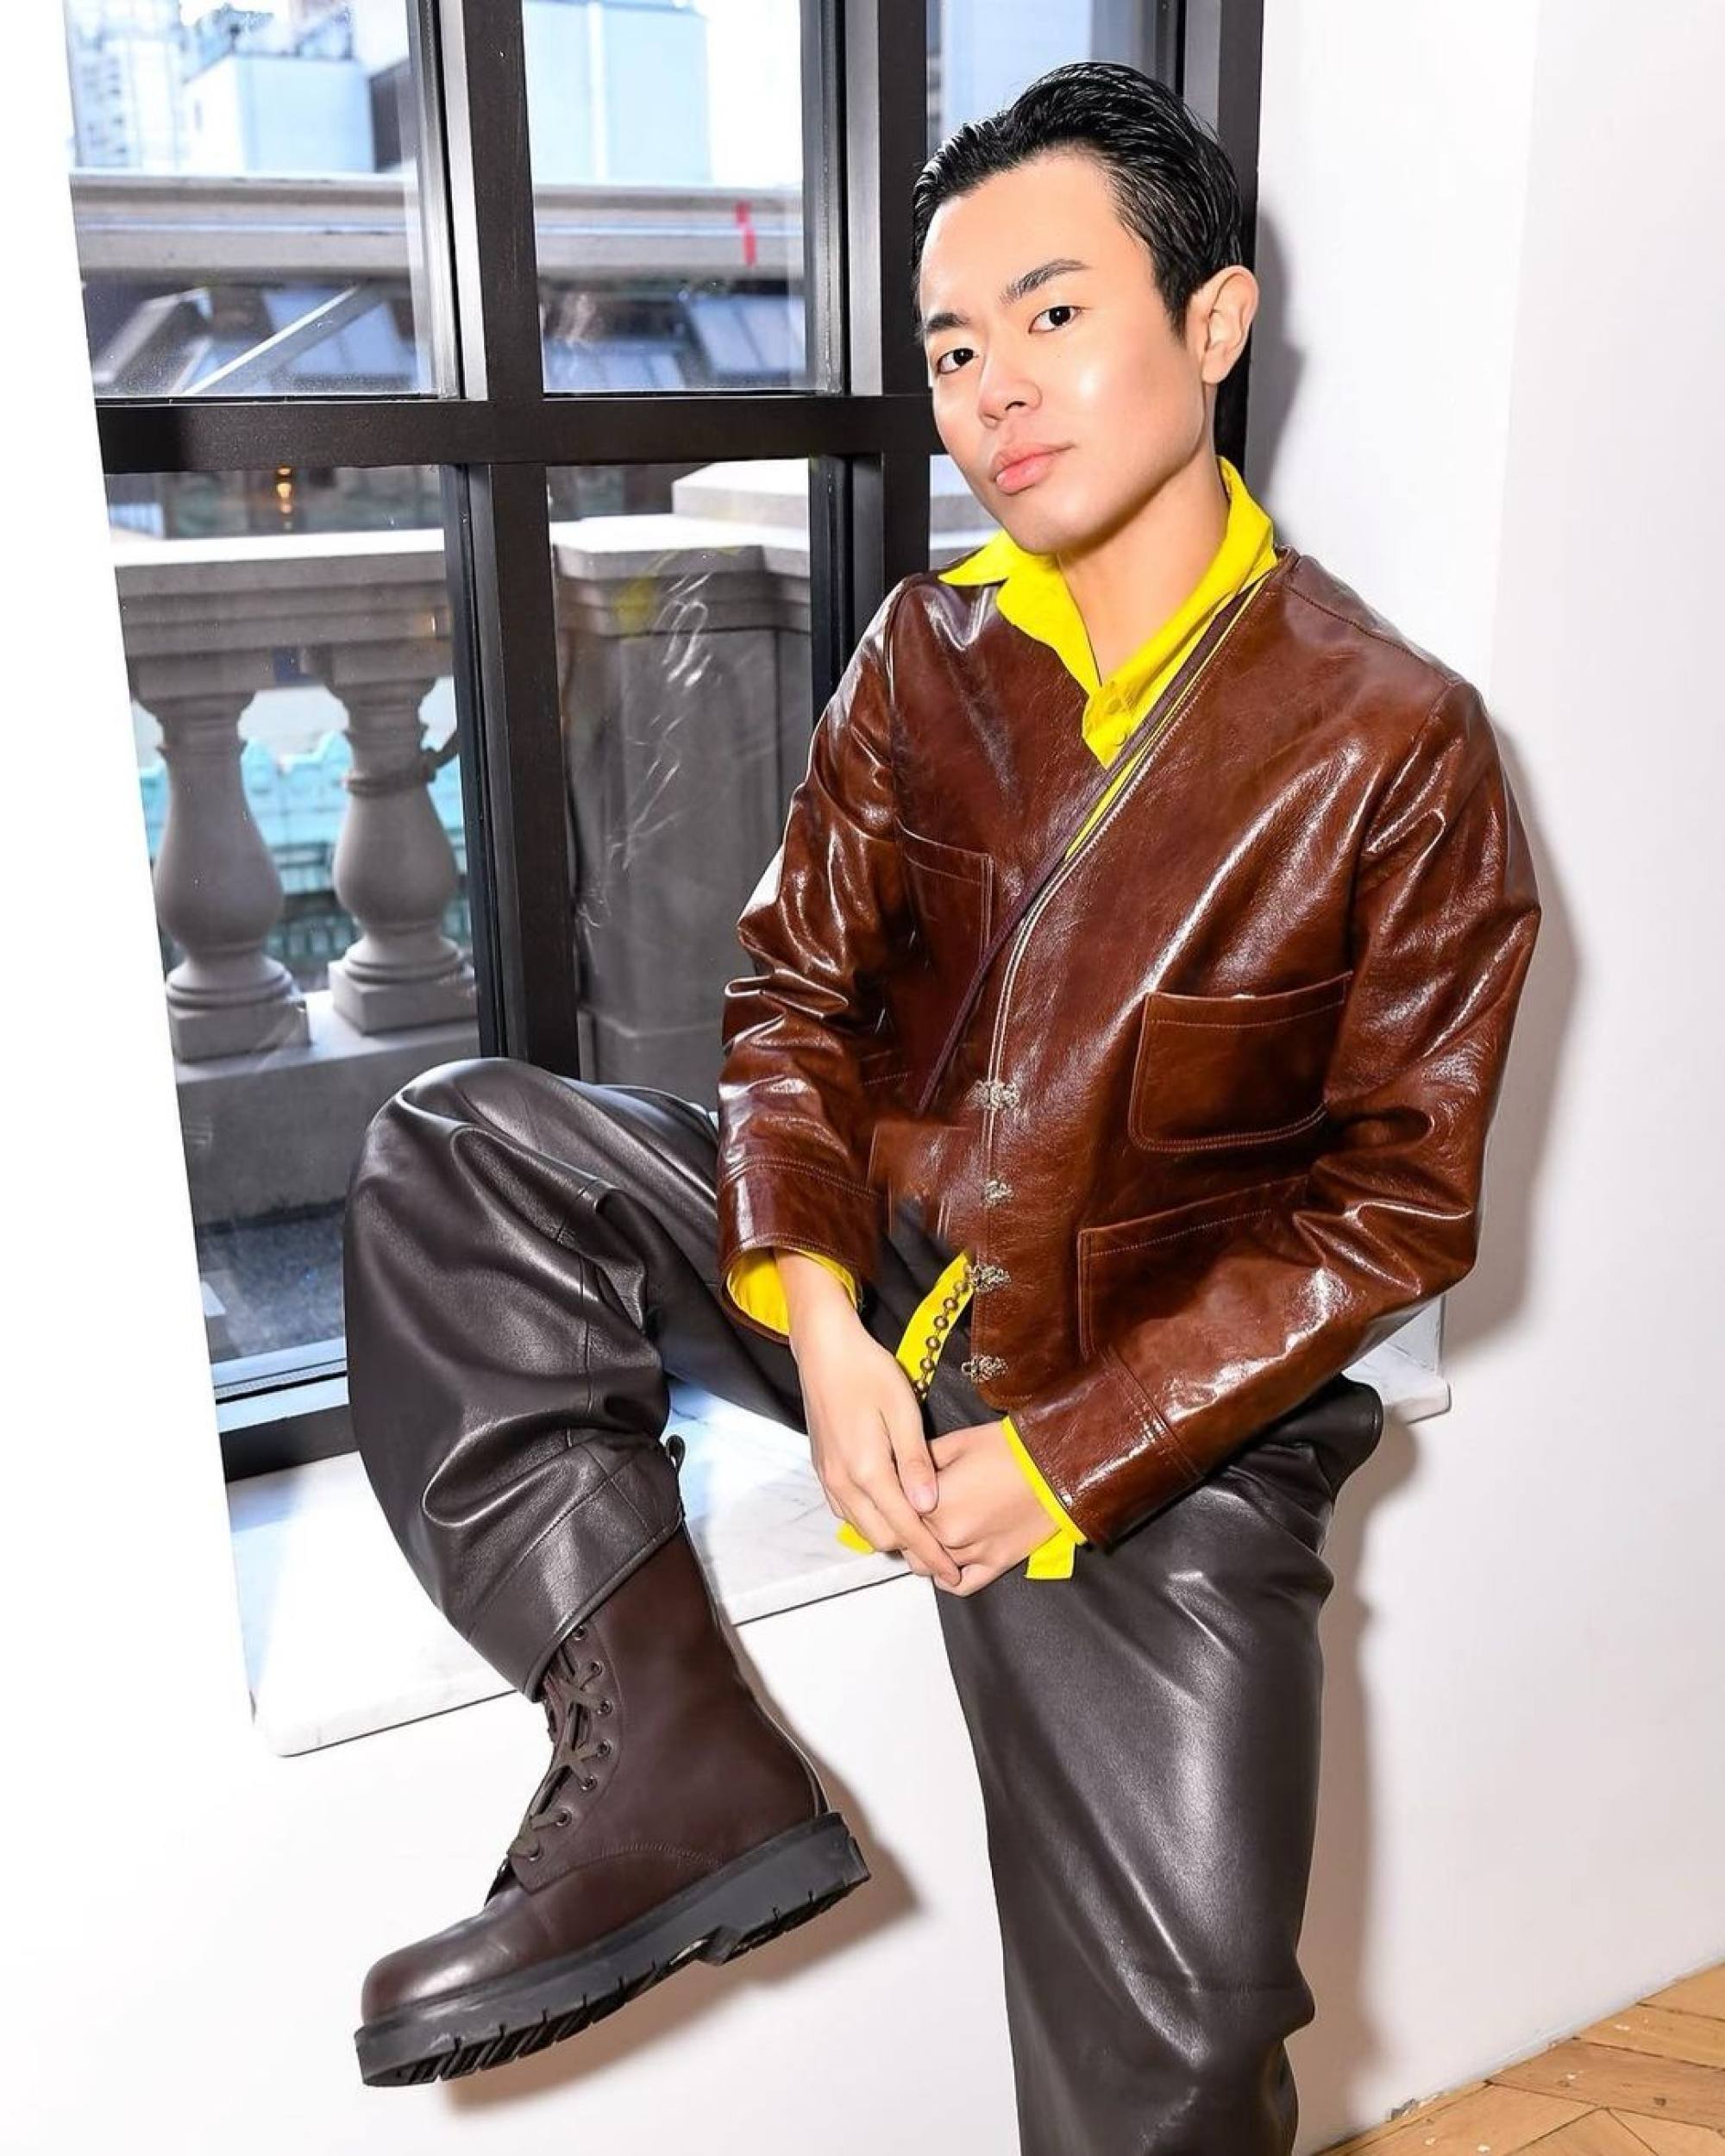 Meet the 5 'Slaysians' taking on the fashion world: from Bling Empire: New  York's Tina Leung and designers Phillip Lim, Prabal Gurung and Laura Kim,  to style socialite Ezra J. William